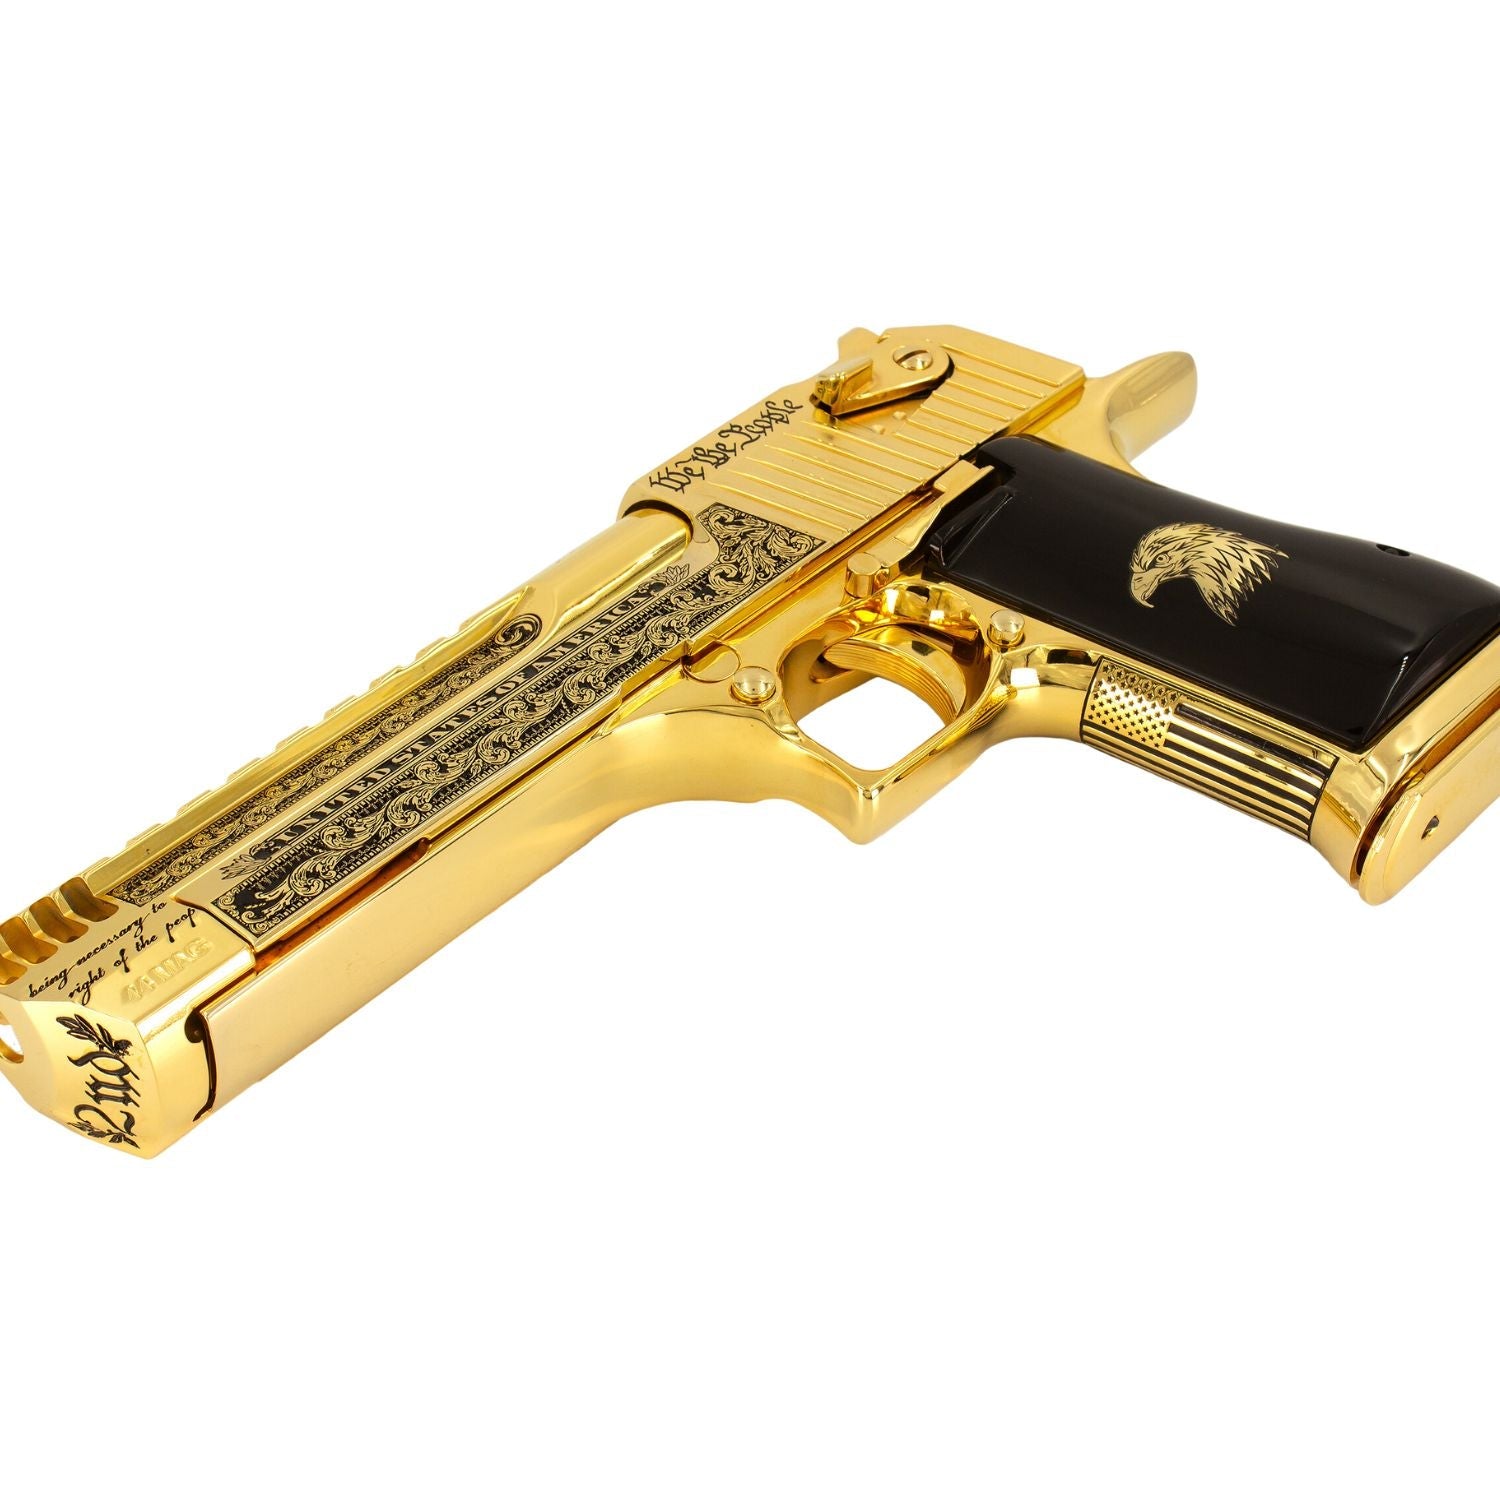 Magnum Research Desert Eagle Patriot 50 AE, 6", 24kt Gold Plated and Engraved, 7010459353190, 761226022350